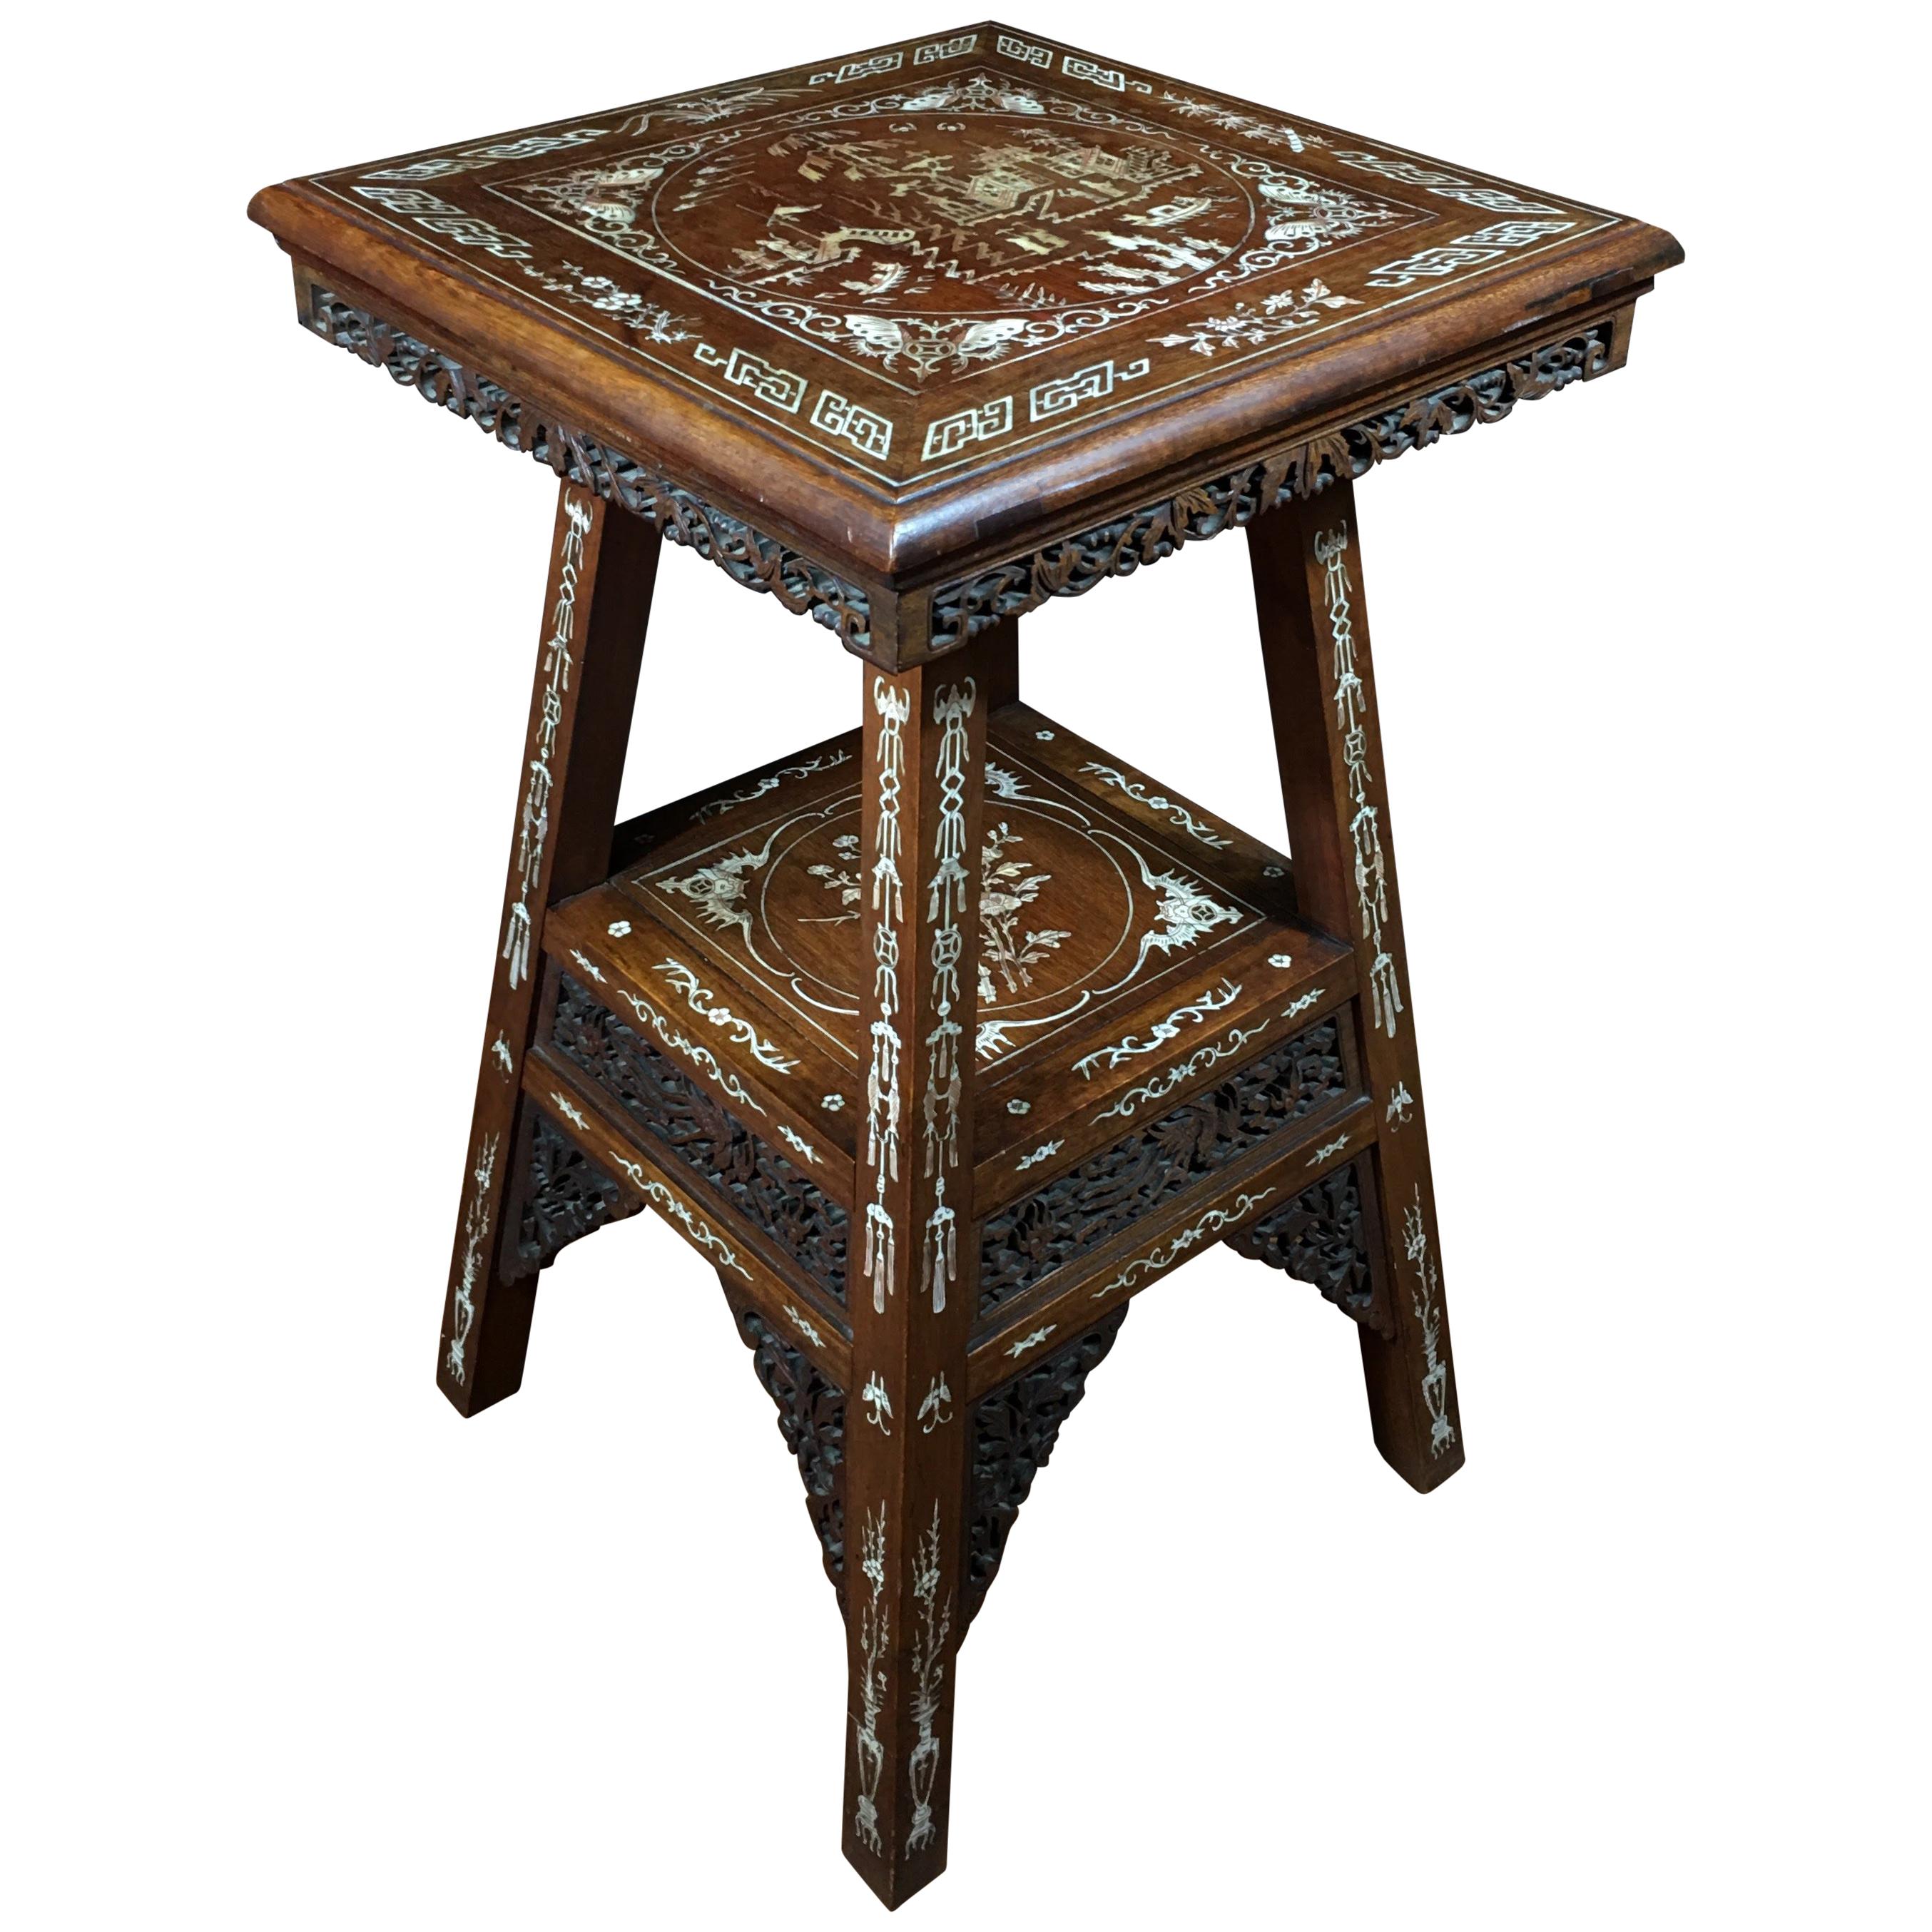 Chinese Hardwood Table with Fine Inlaid Bone Scenes, circa 1925 For Sale